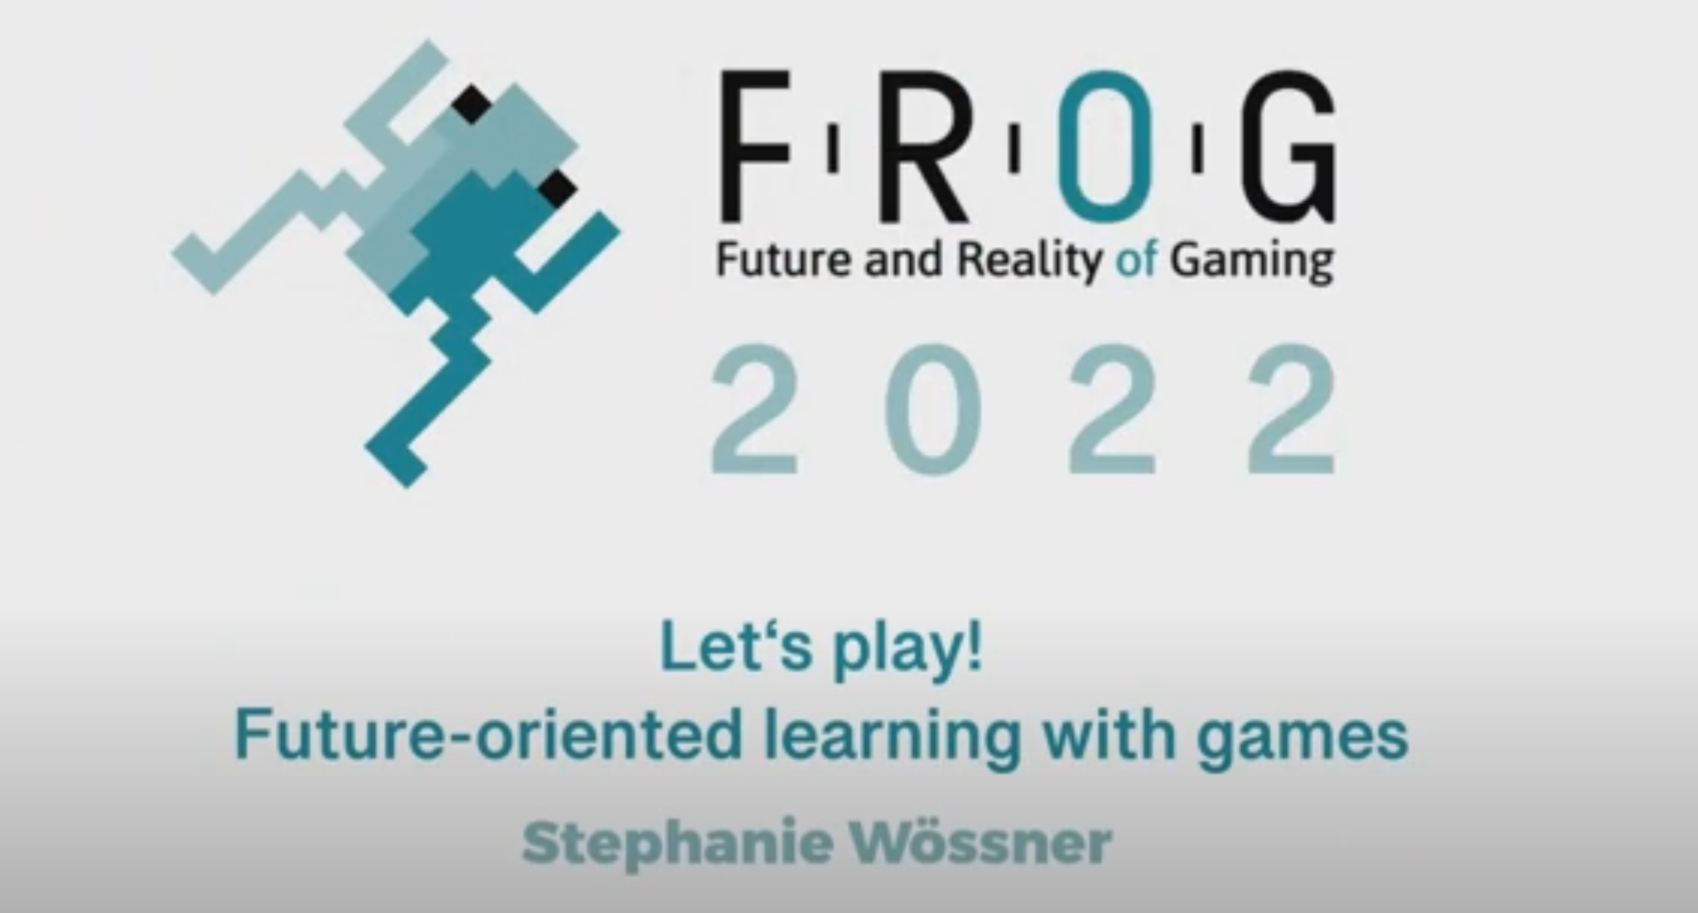 Let‘s play! Future-oriented learning with games